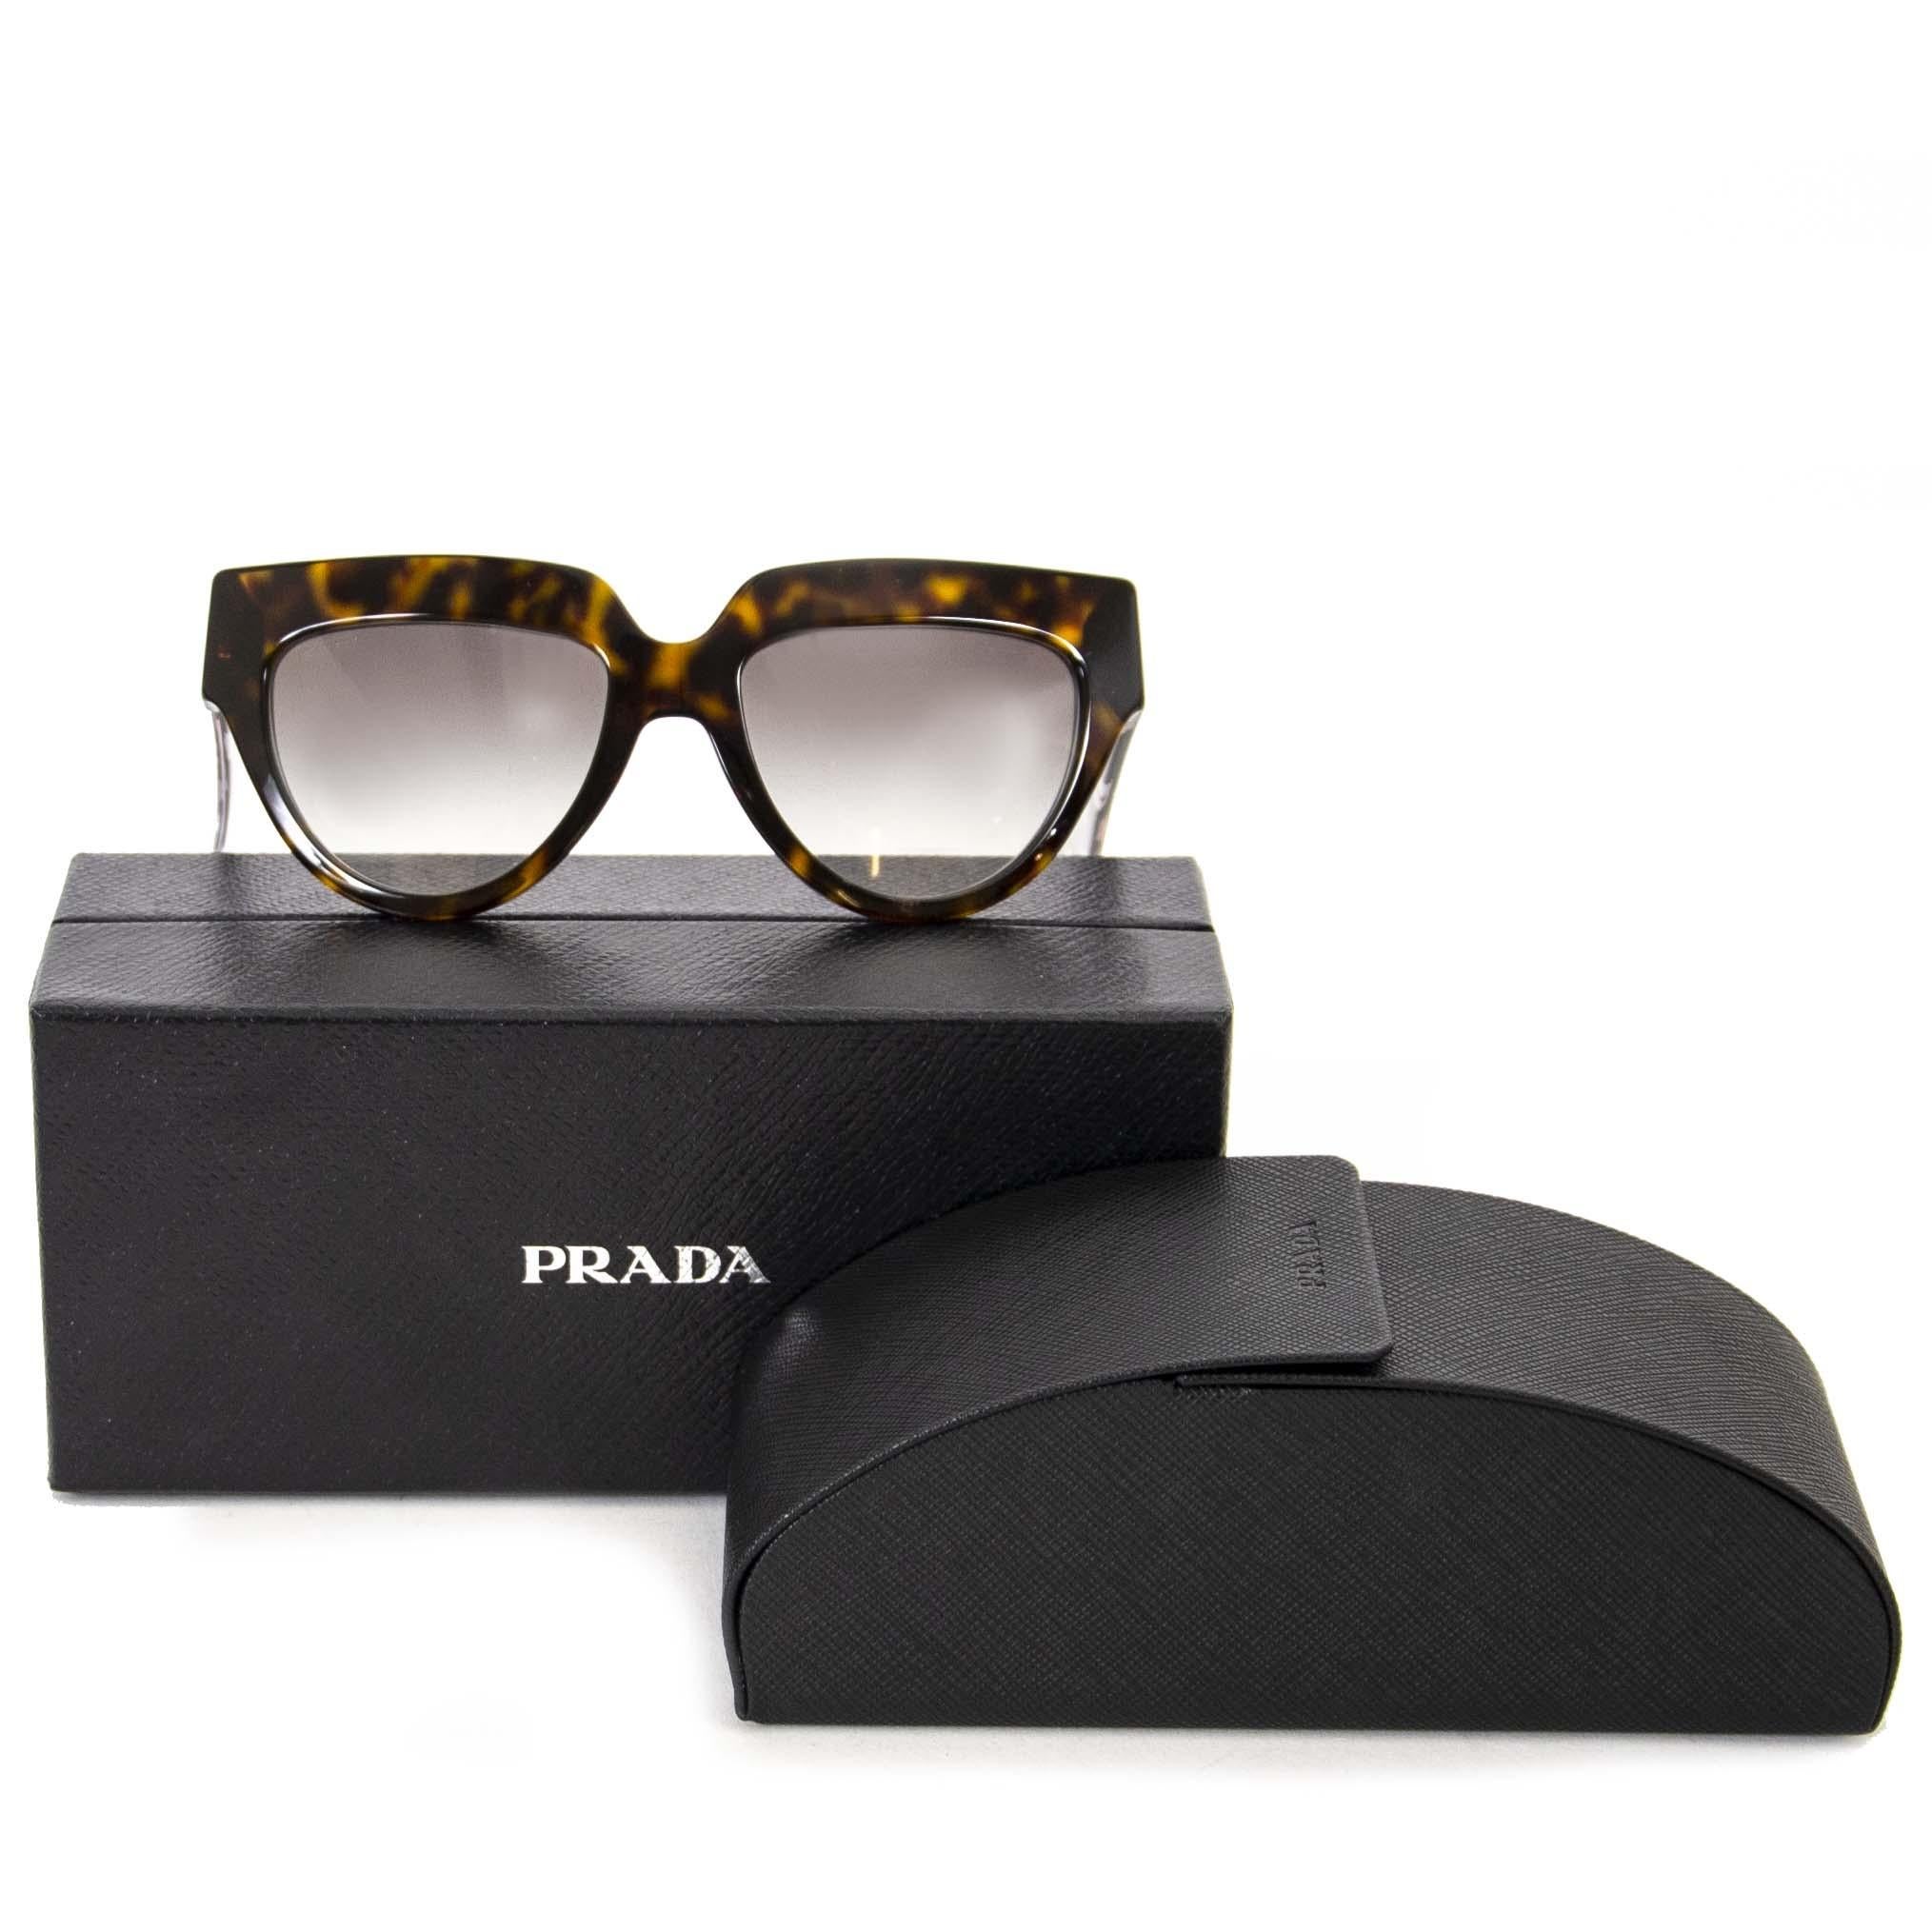 Very good condition

Prada Poeme Black And Tortoise Flower Sunglasses

These gorgeous Prada sunglasses feature a tortoise color and black temples with a white flower design on the inside. 
These edgy sunnies will make you feel like a million